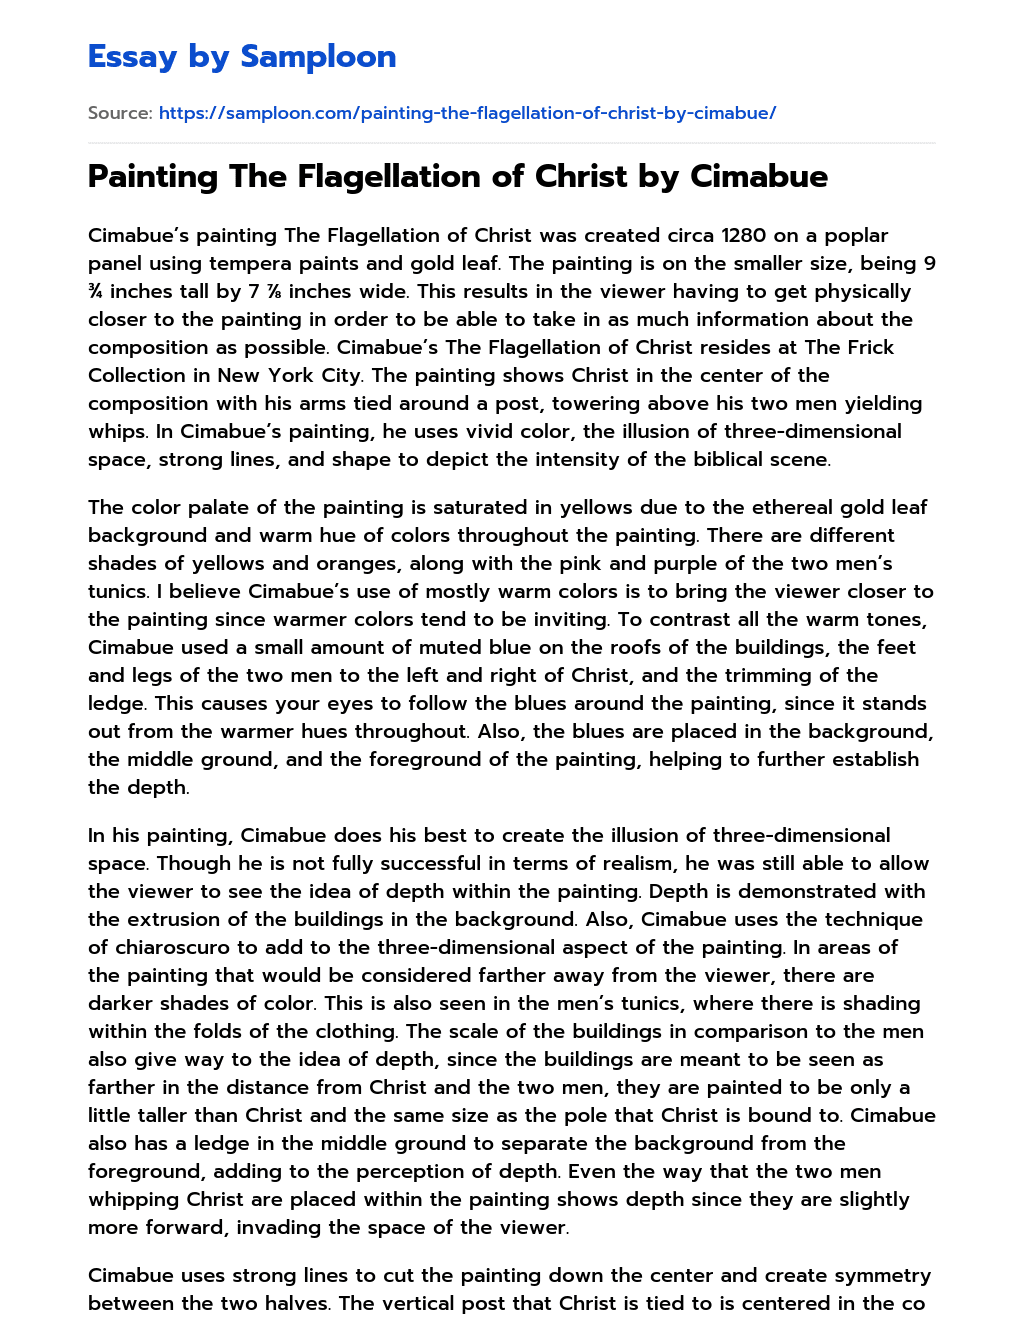 Painting The Flagellation of Christ by Cimabue essay